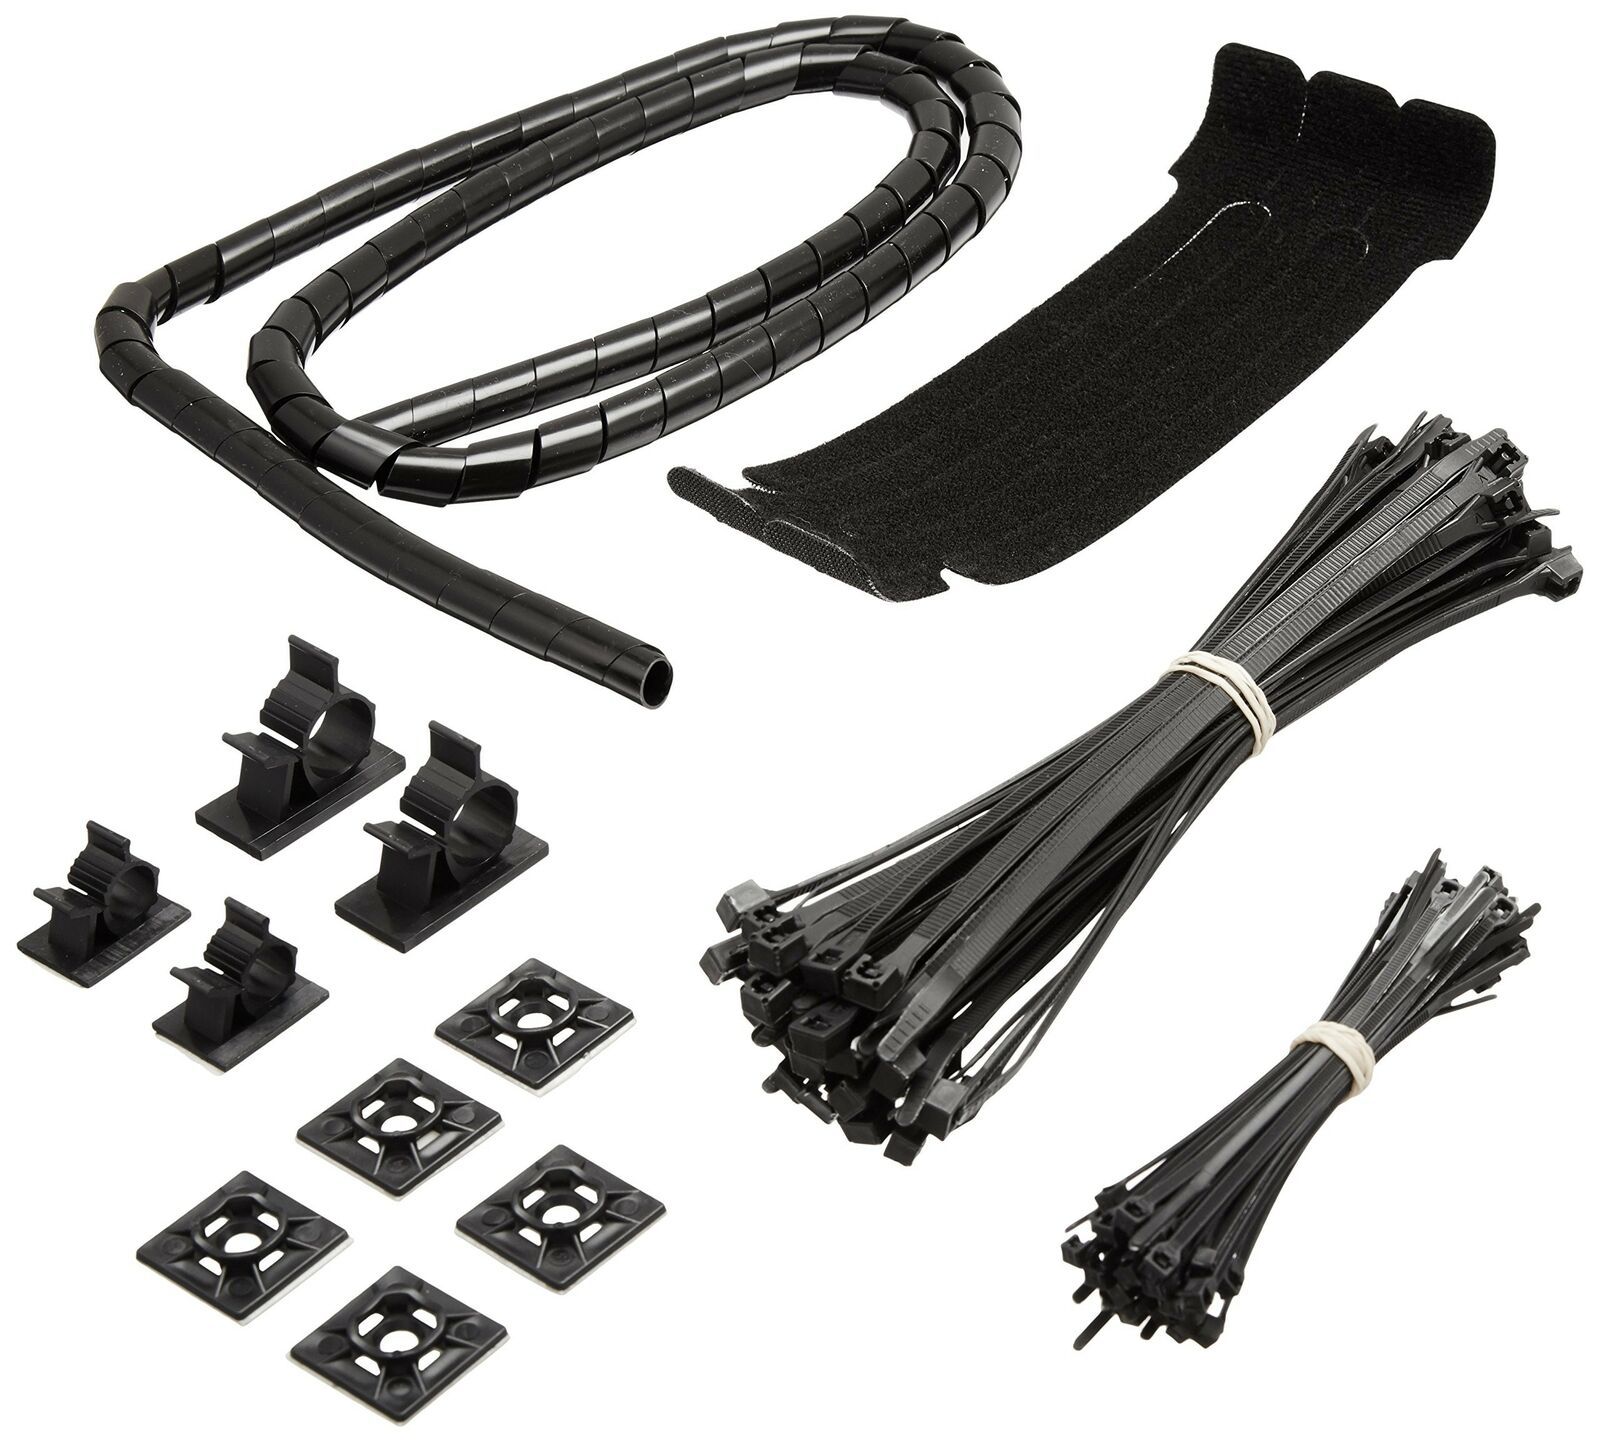 Primary image for Gardner BenderWMK-101M Electrical Wrap Pack Electrical Cord Organizers Kit